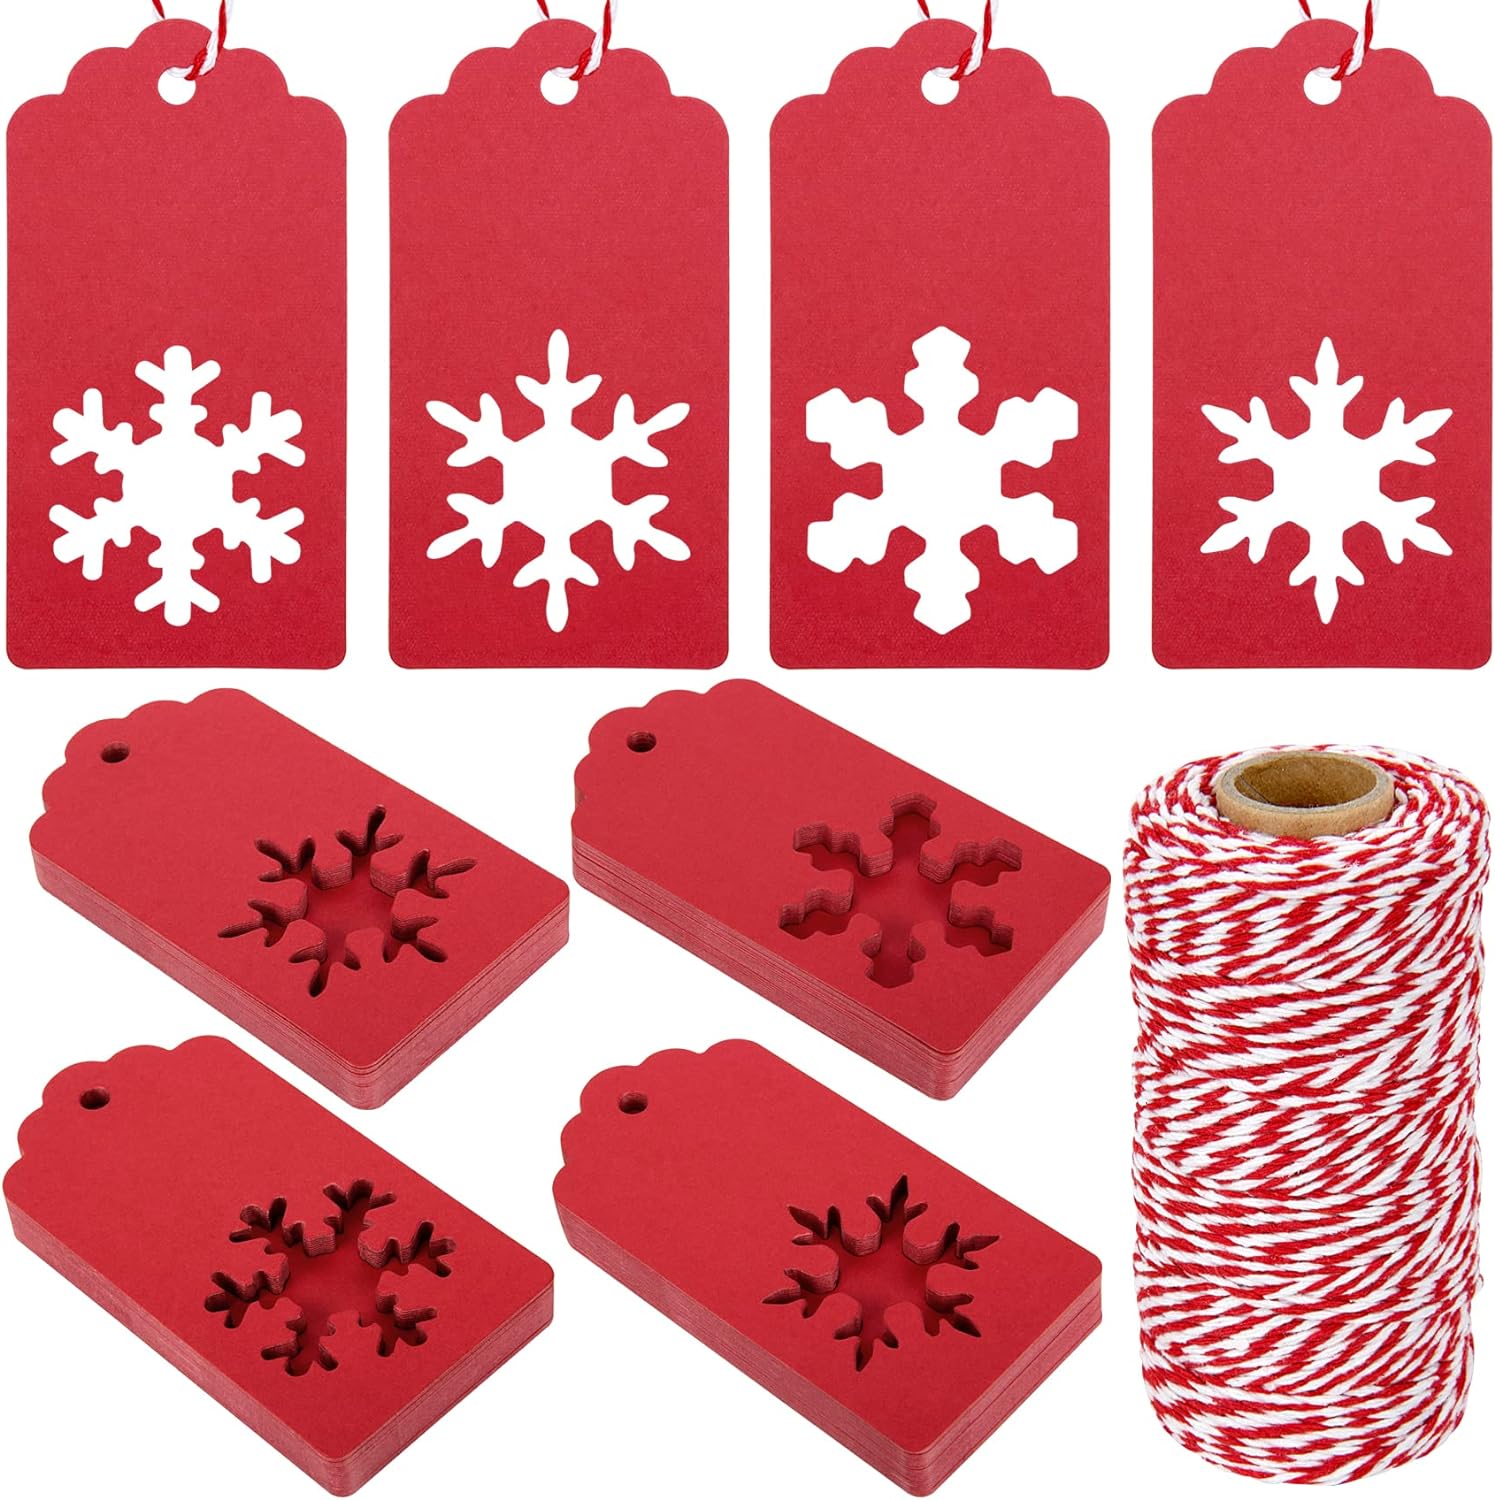 Blisstime 100 PCS Christmas Gift Tags in 4 Styles Snowflakes with 300 Feet Red and White Twine, Kraft Paper Snowflake Tags for Christmas Tree Hanging and Gift Wrapping